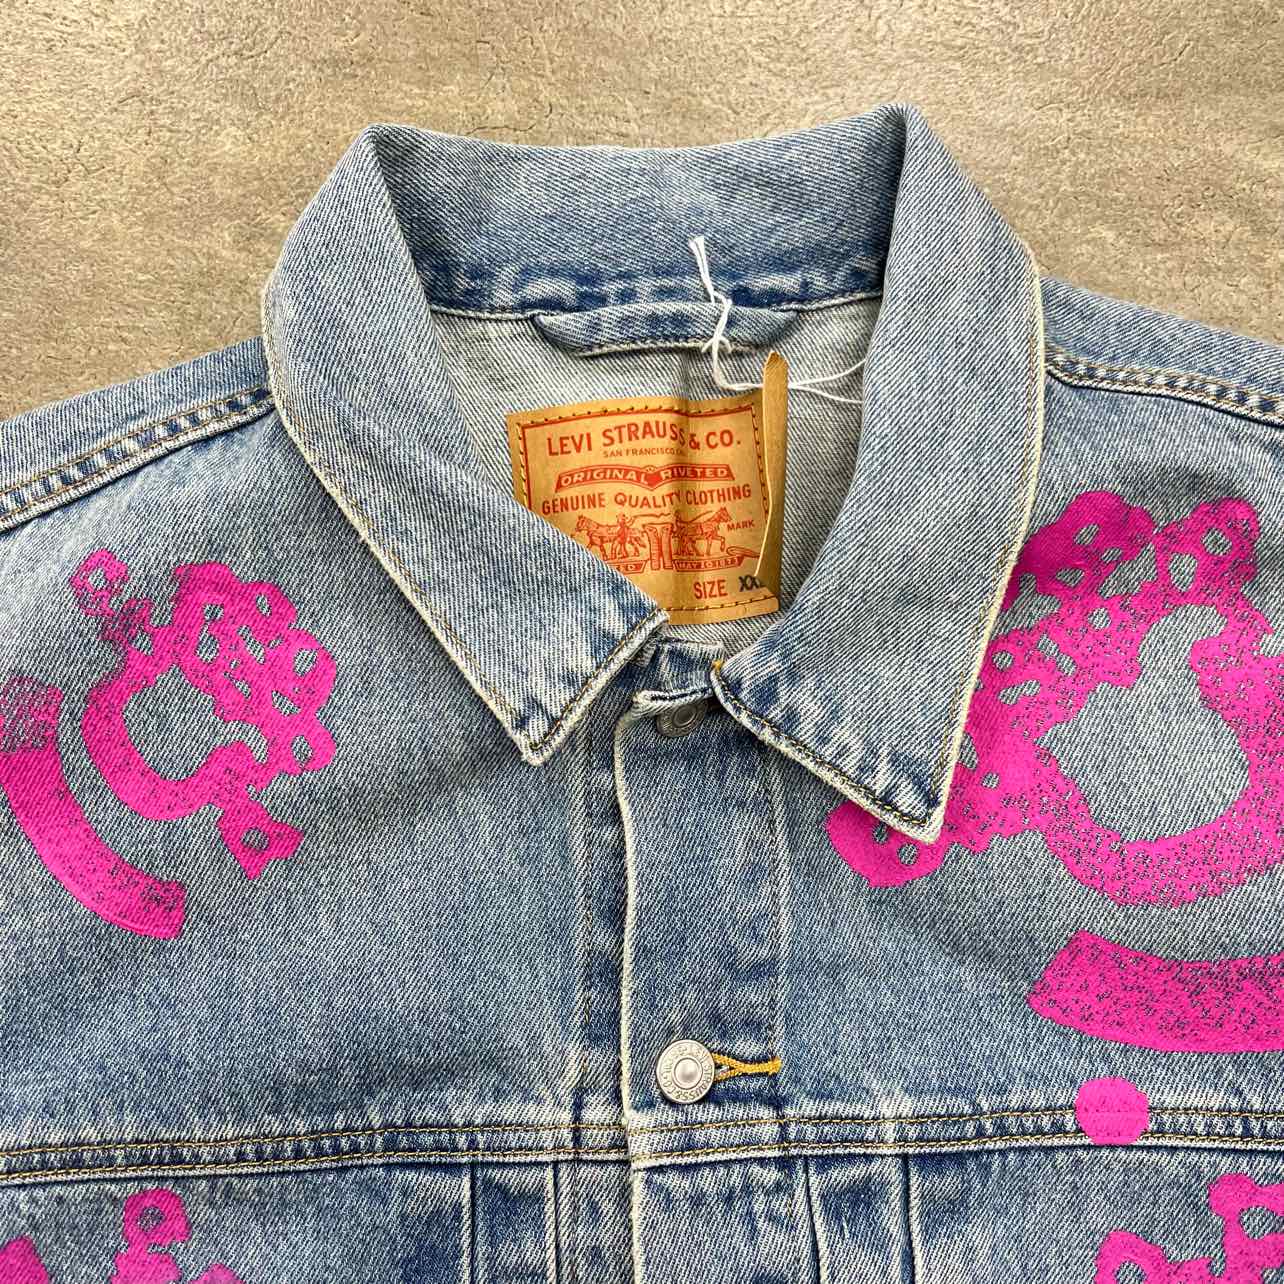 Denim Tears Jacket &quot;BSTROY TEARS&quot; Pink/Green Used Size 2XL